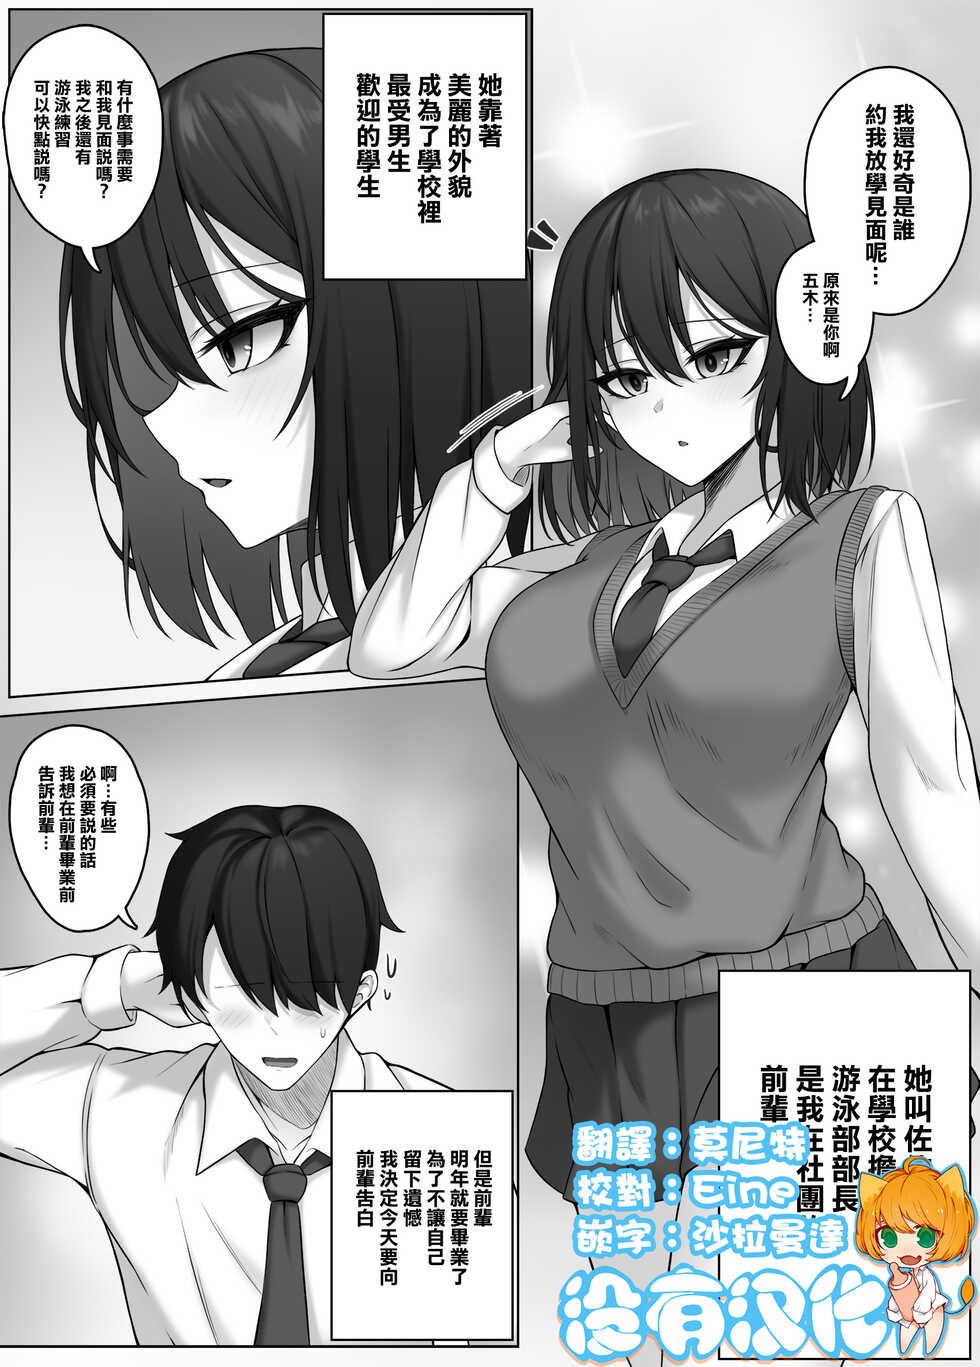 [Djqn] Succubus House [Chinese] [沒有漢化] - Page 1